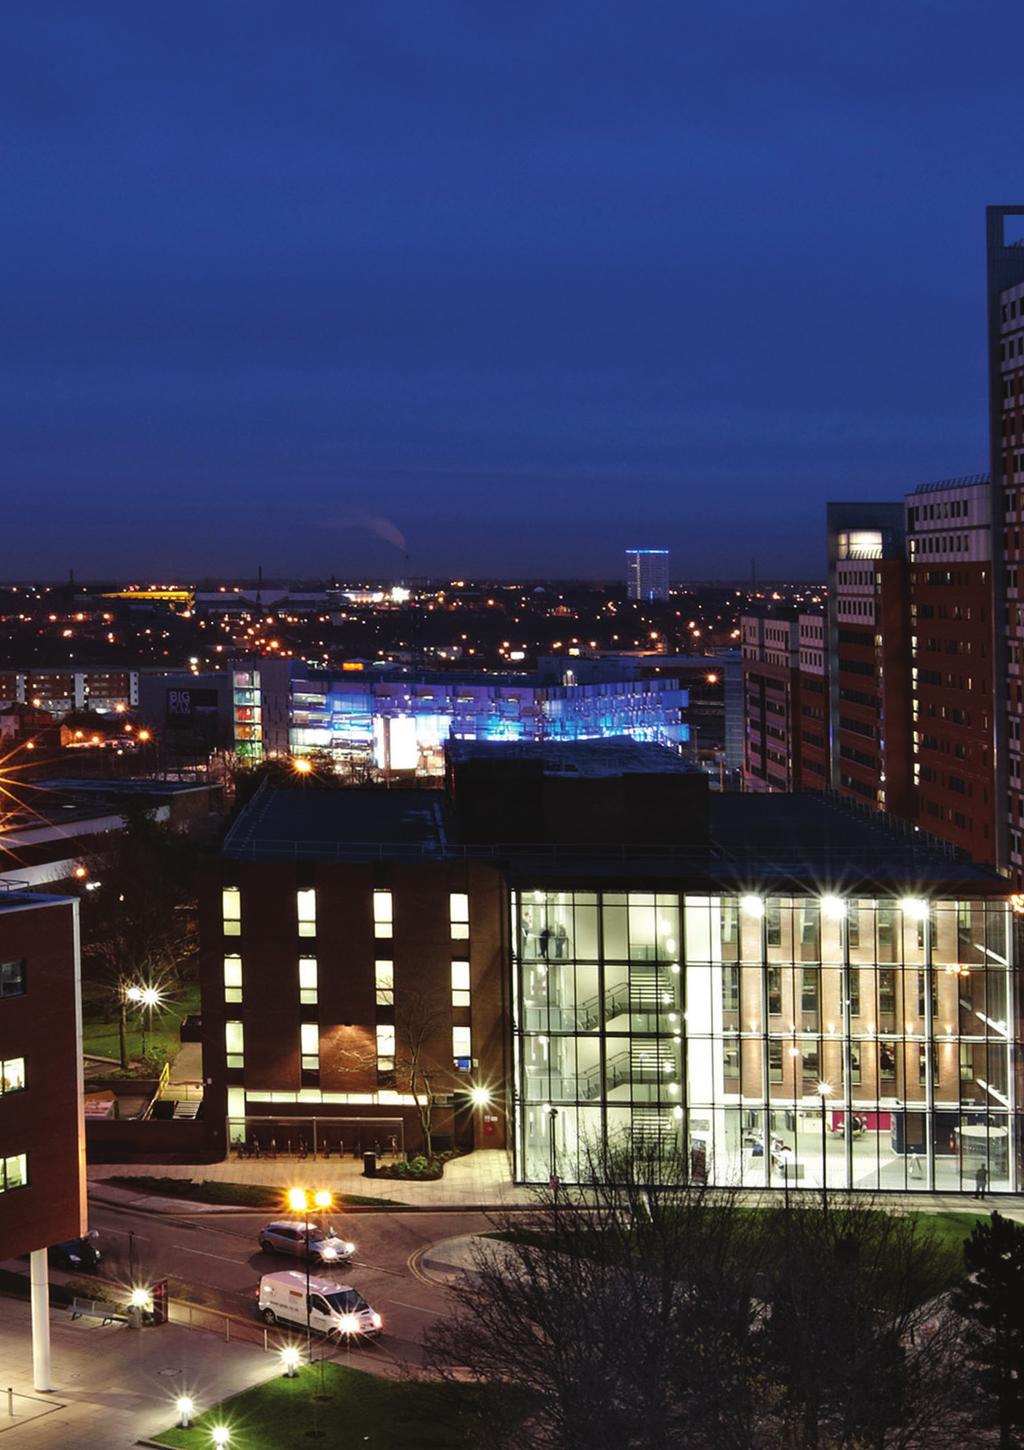 About Aston University Founded in 1895 and a University since 1966, Aston is a long established research led University known for its world-class teaching quality and strong links with industry,